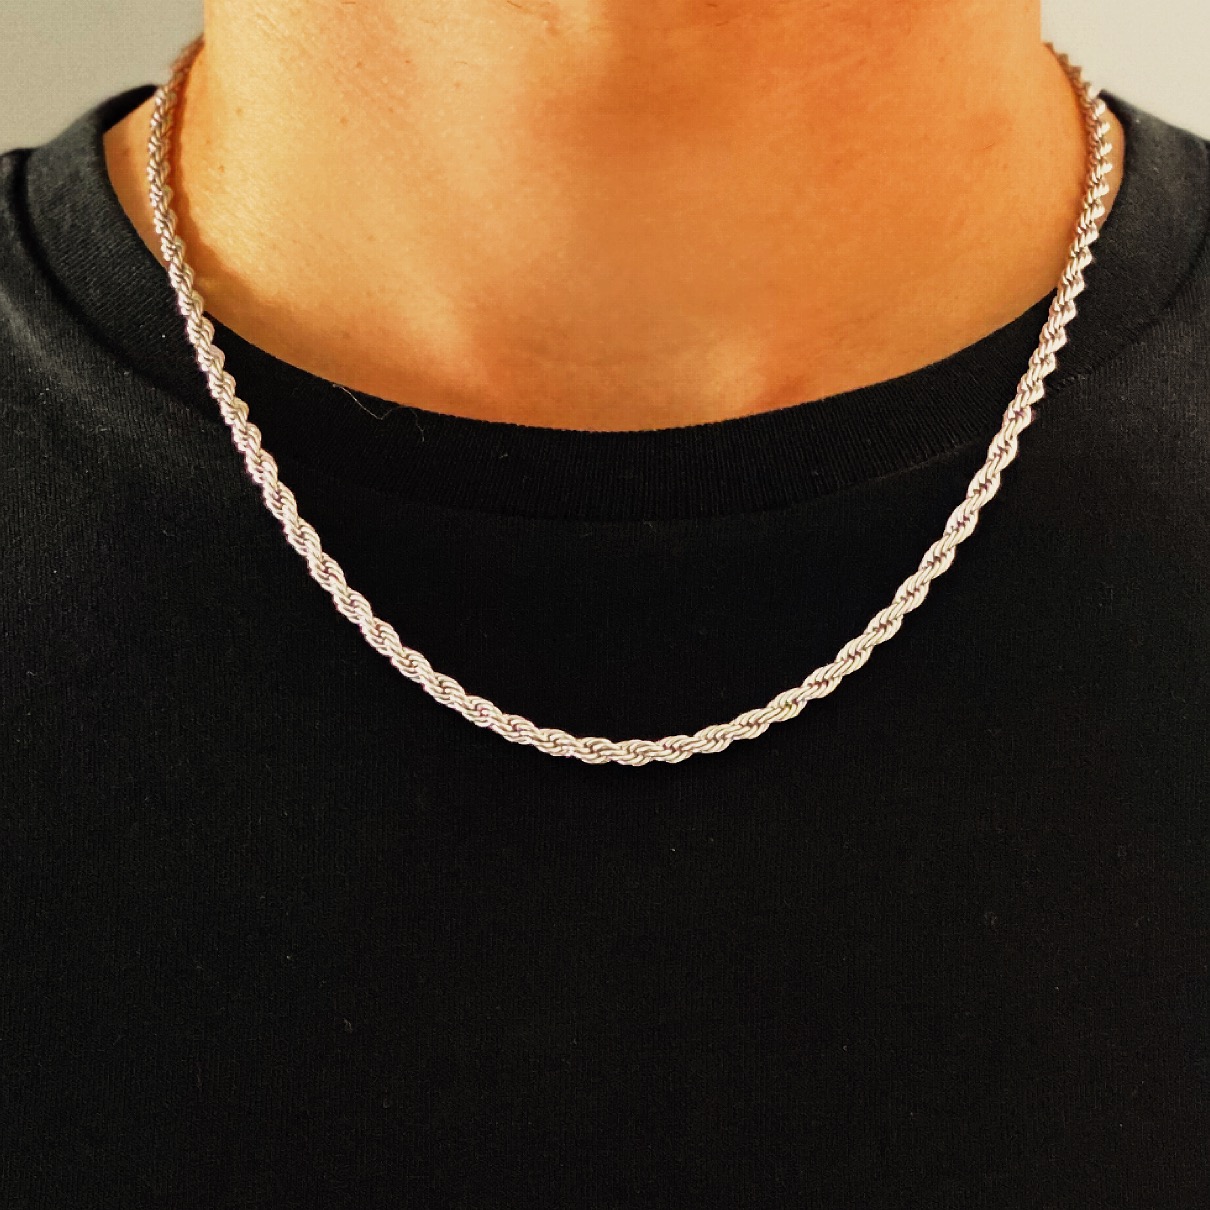 Real Necklace for Men|Twist Silver Rope Necklace